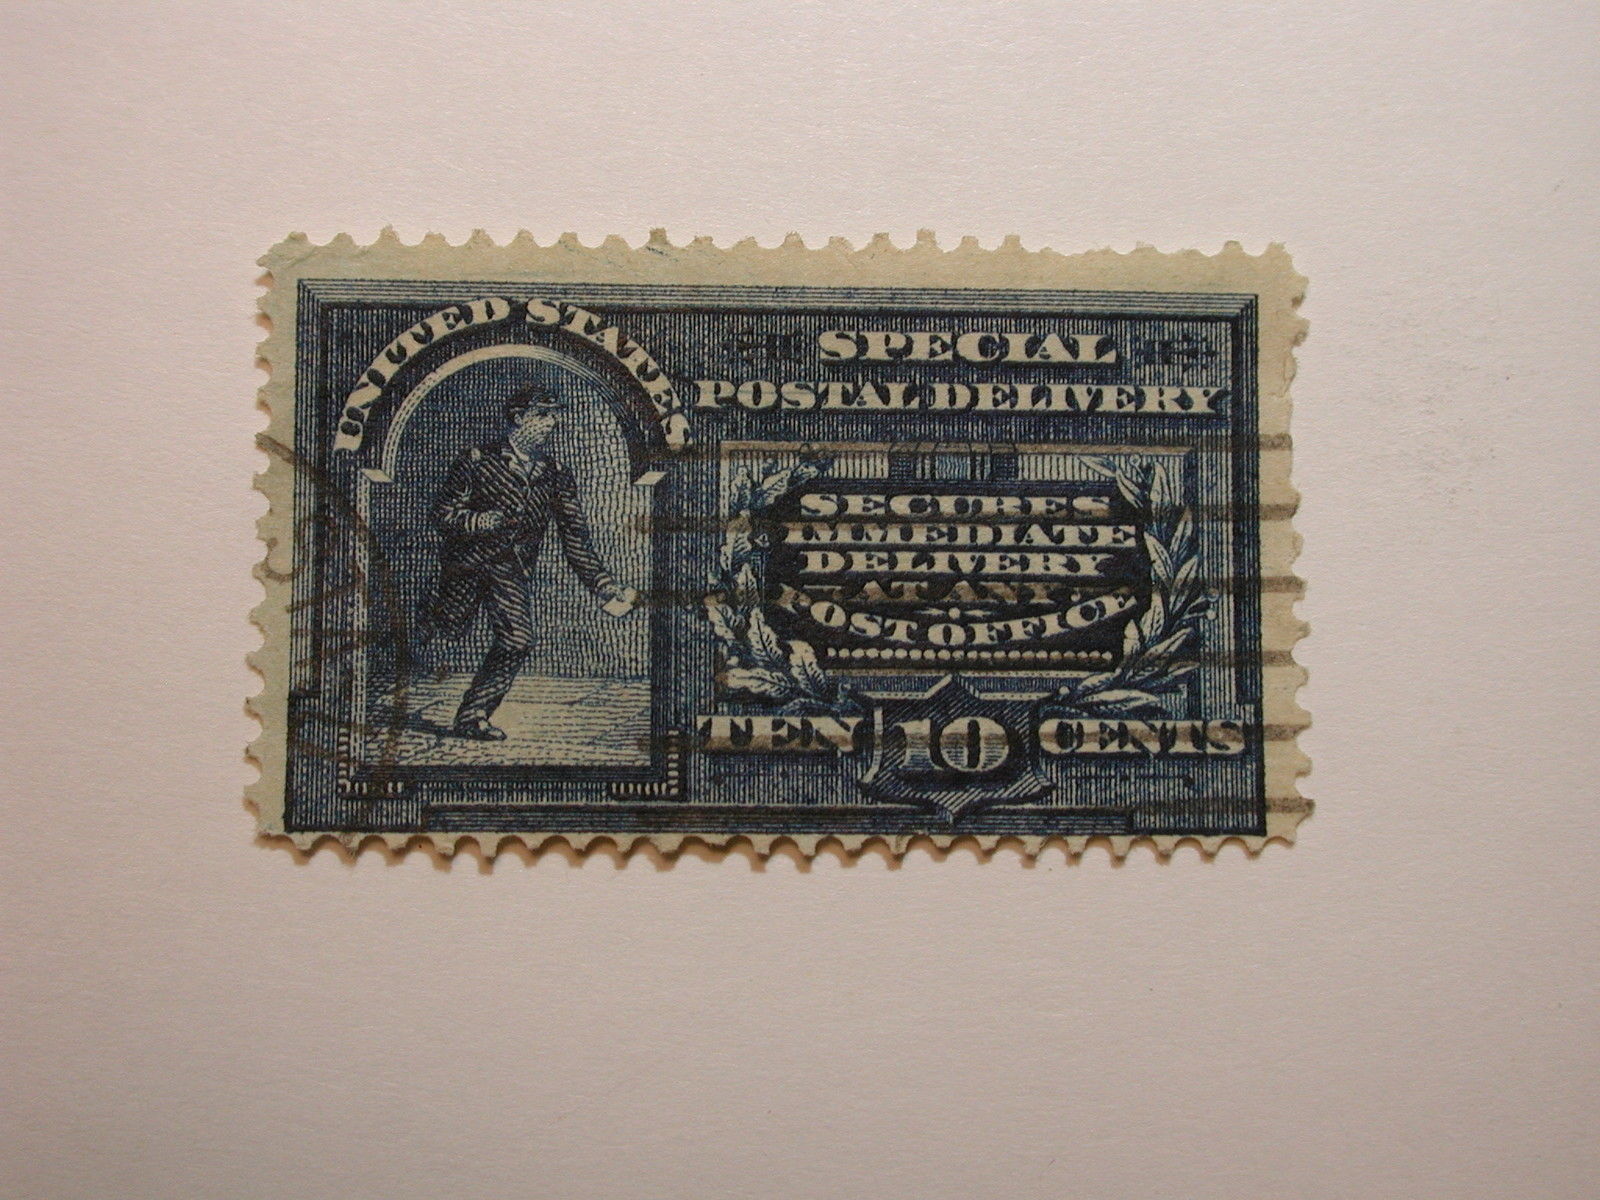 US Stamps Scott #E4 Special Postal Delivery Ten Cents, used